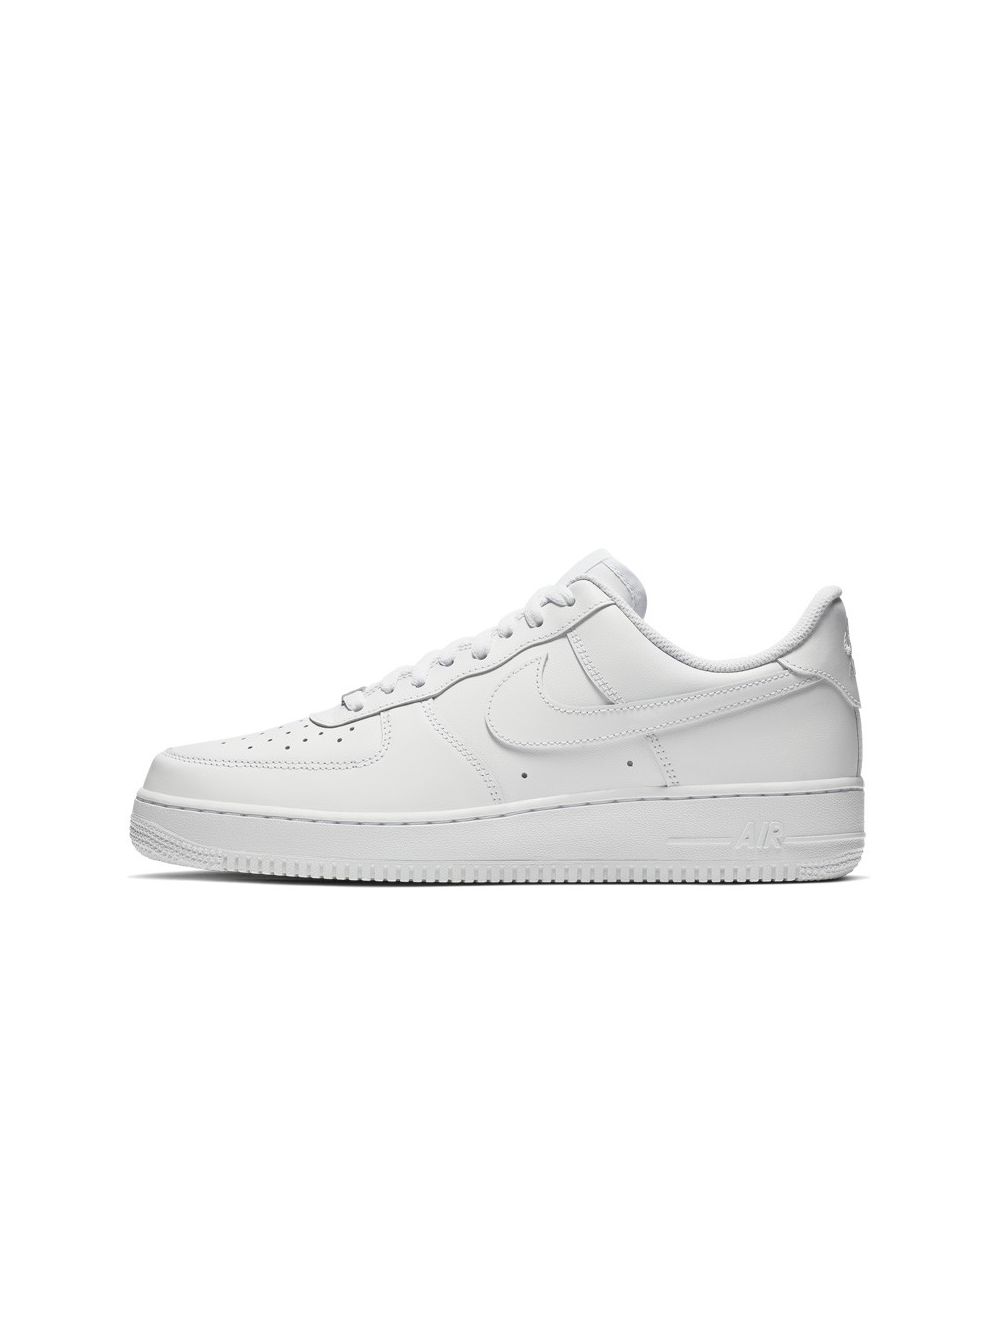 air force 1 kids size 4.5